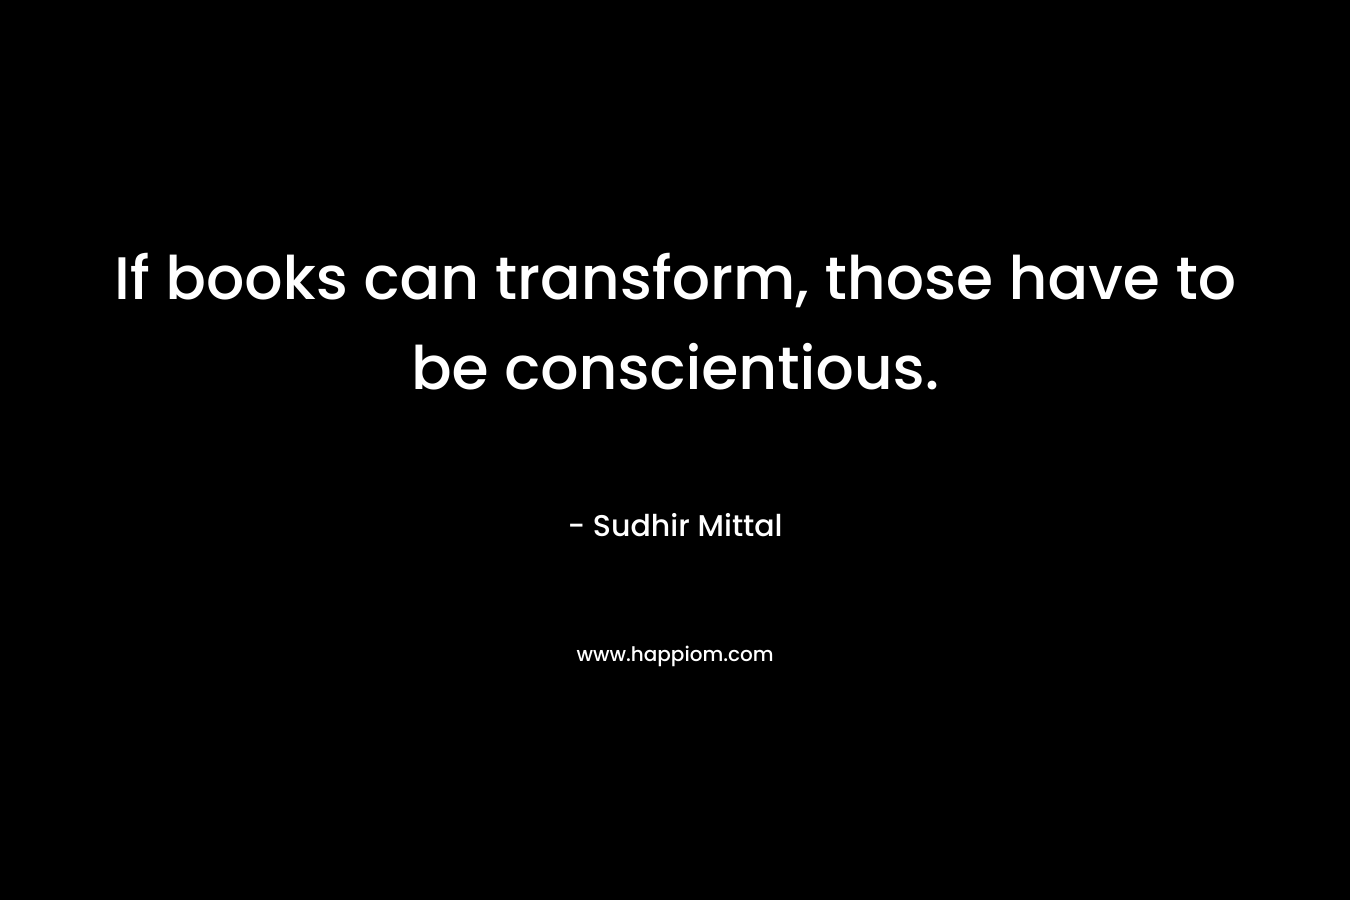 If books can transform, those have to be conscientious.